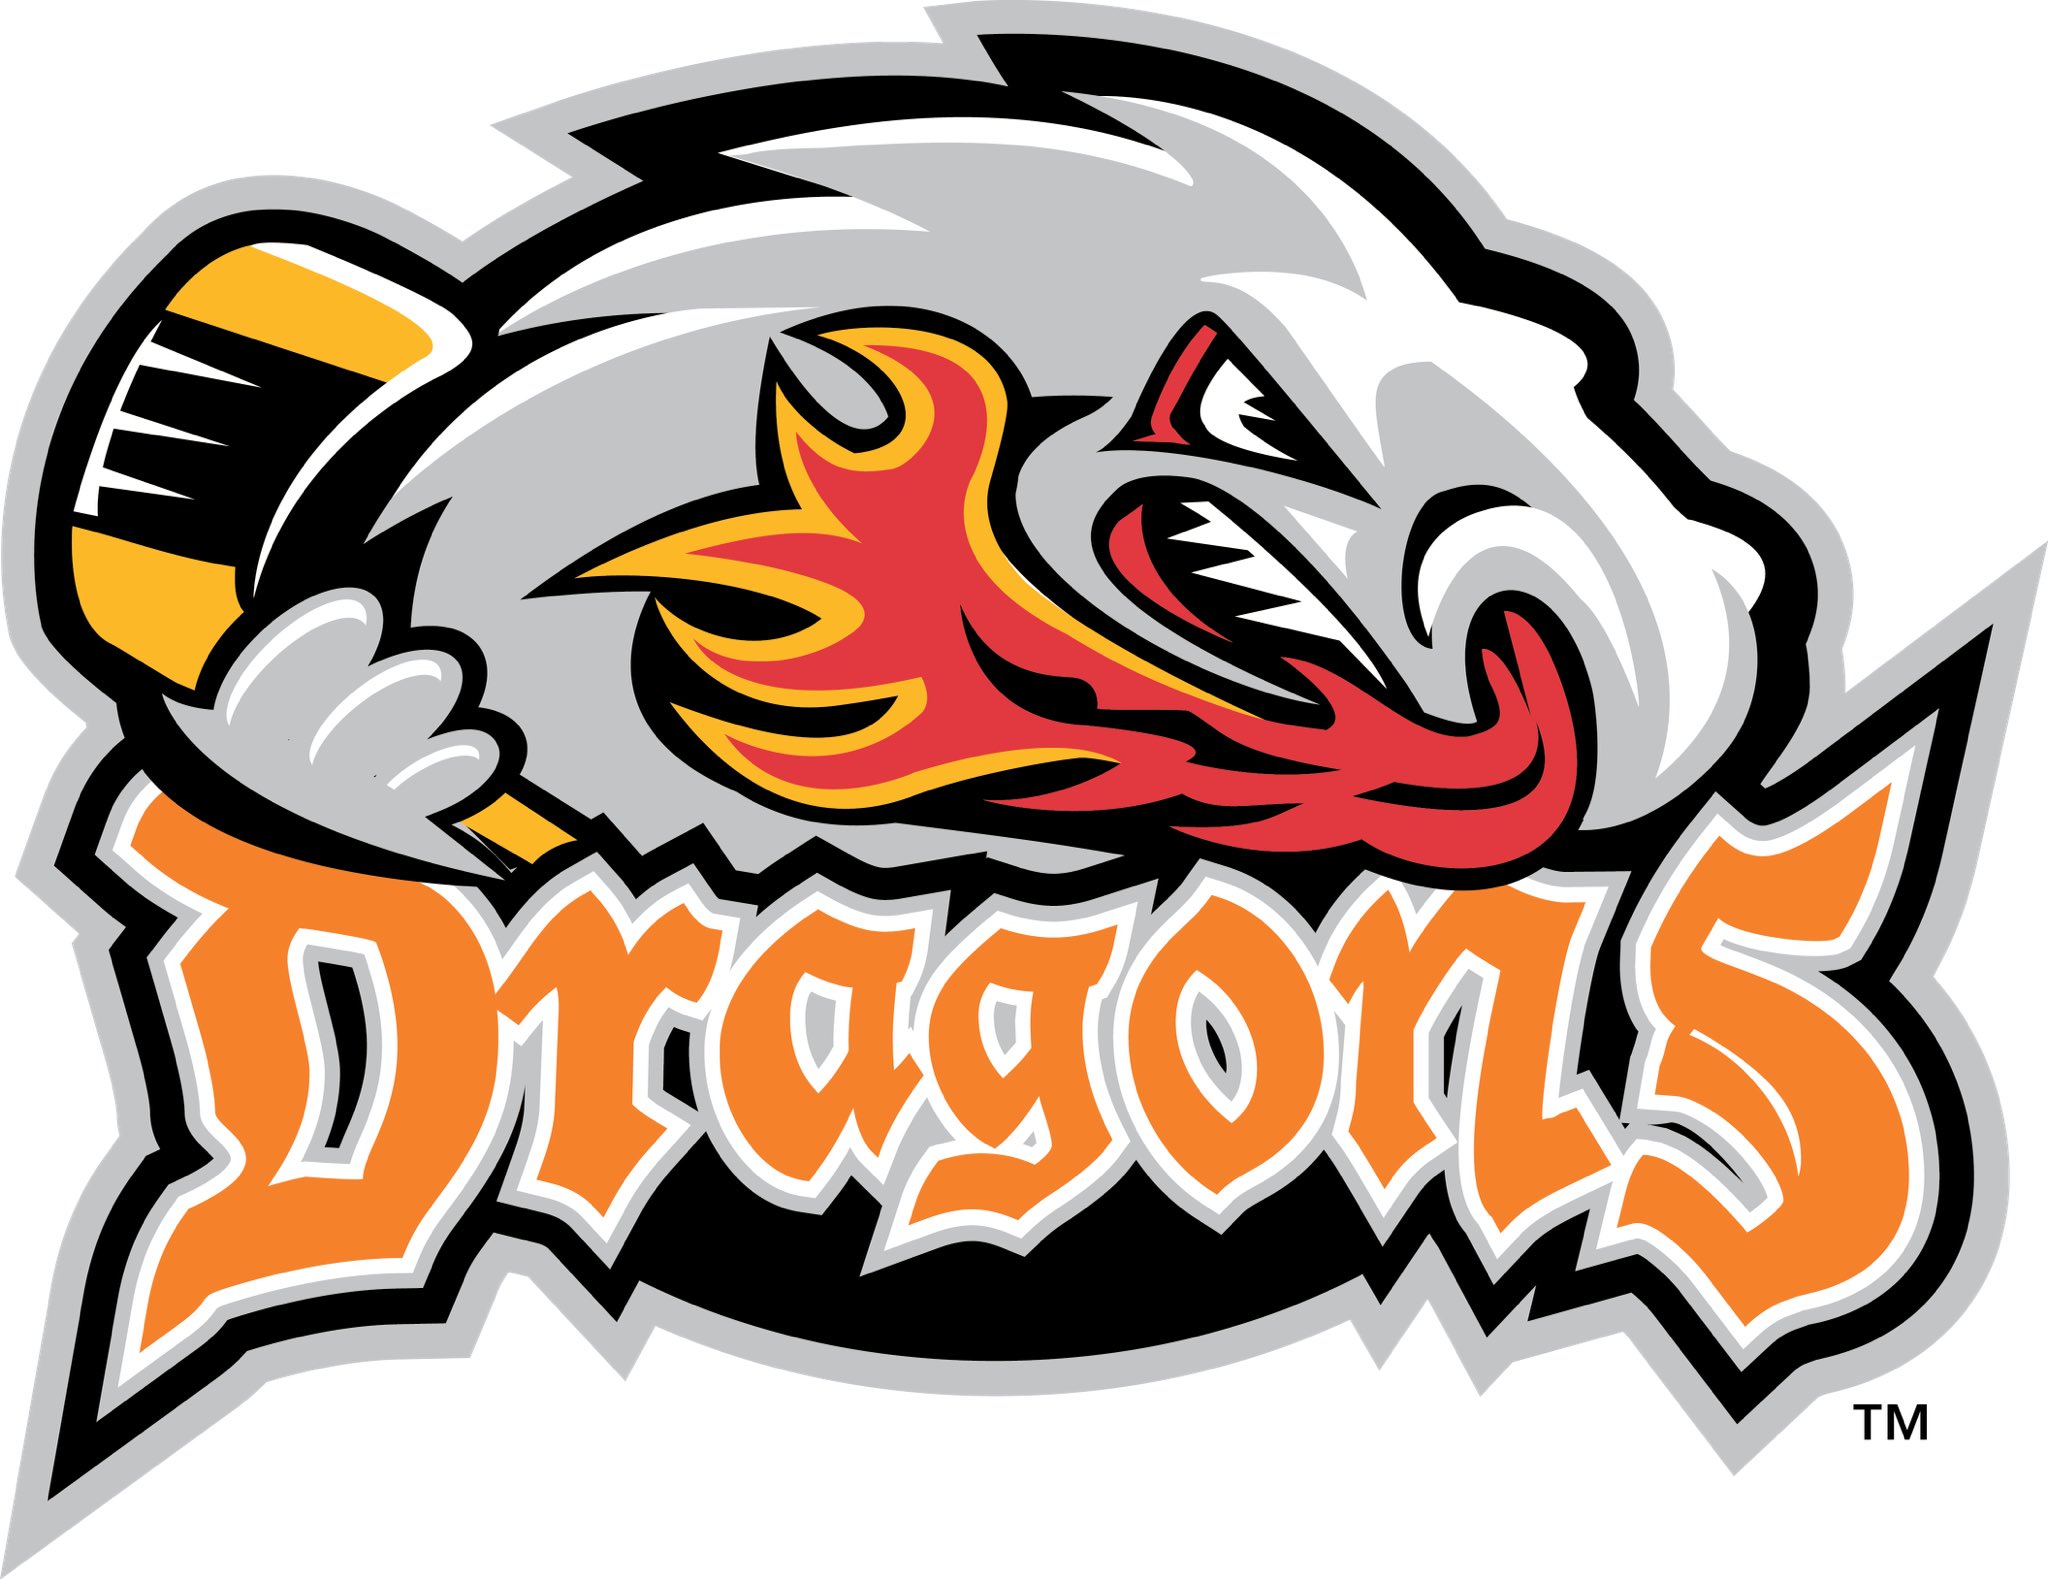 Drumheller Dragons on Twitter: "Due to the recent annoucements of COVID-19  precautions and measures, the Drumheller Dragons office will be closed. We  will reopen to the public when able to do so.